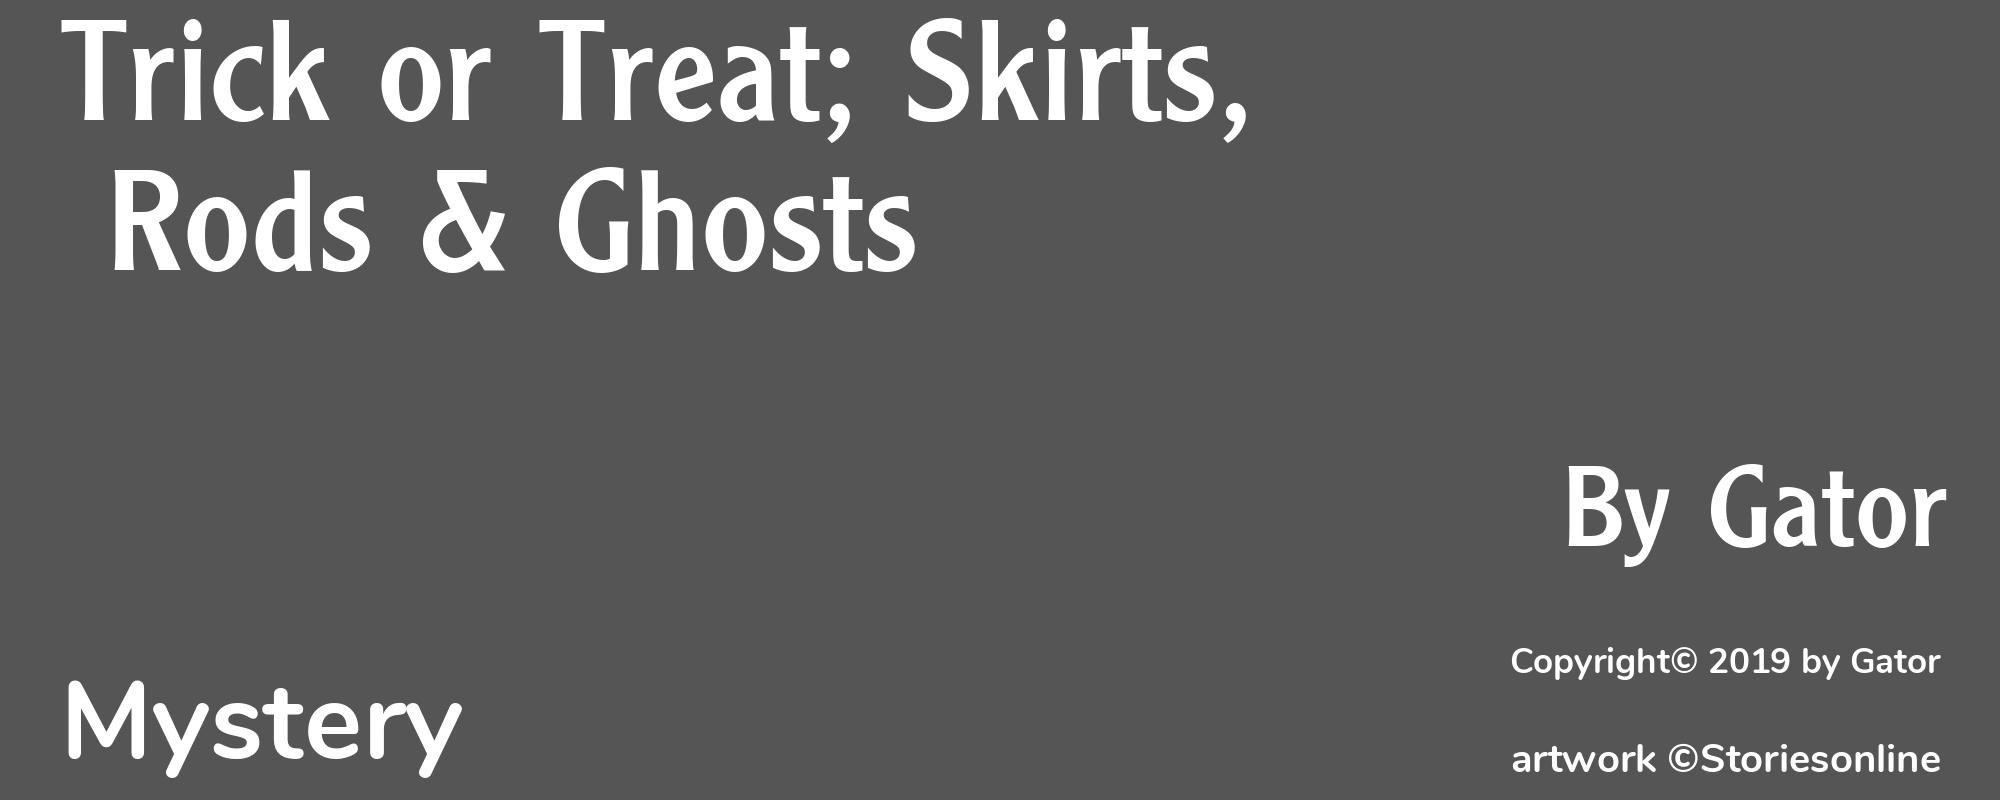 Trick or Treat; Skirts, Rods & Ghosts - Cover